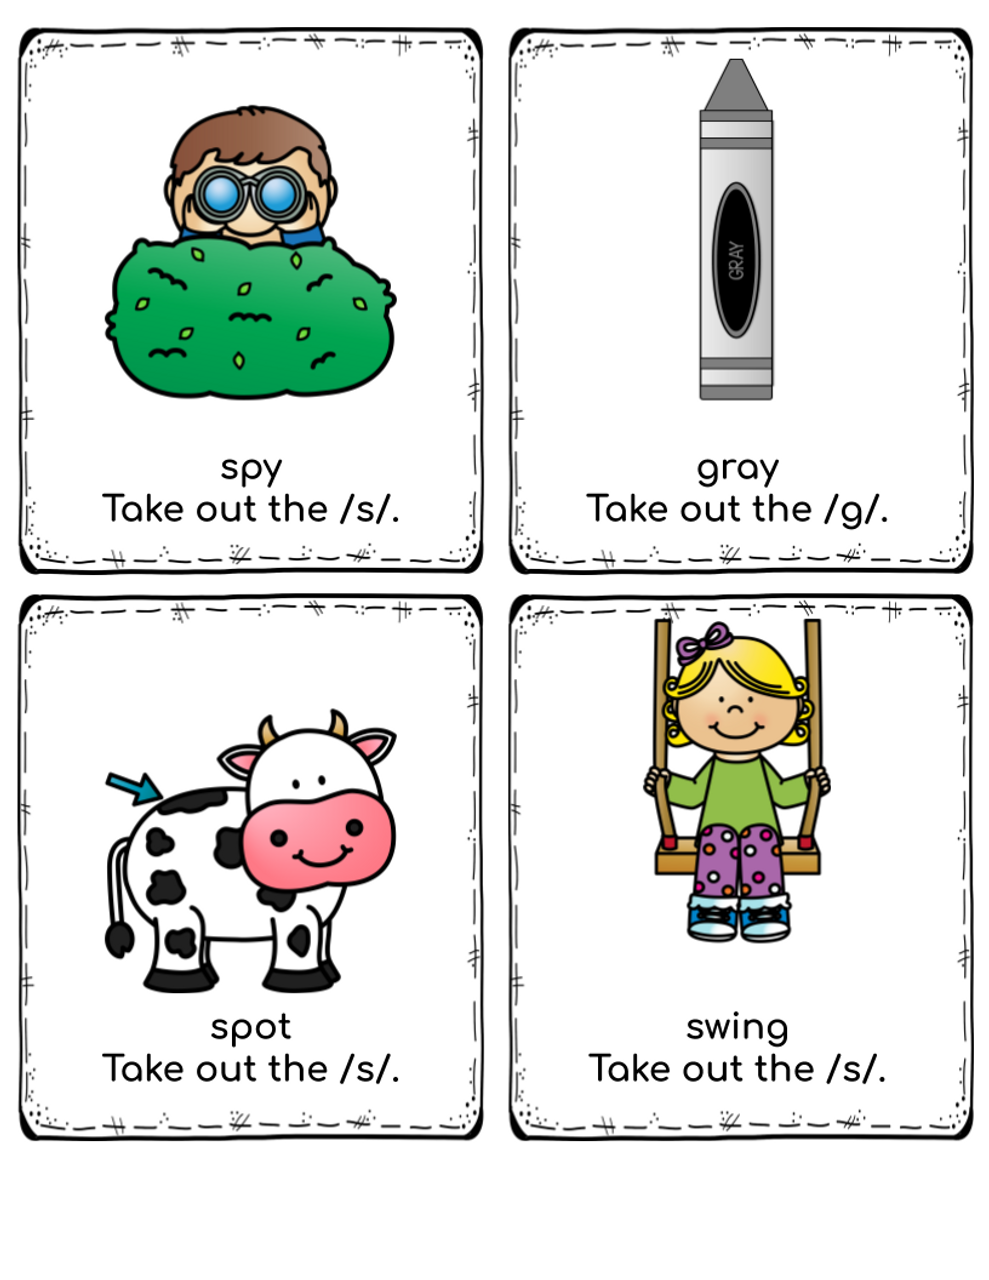 initial-phoneme-deletion-from-a-blend-printable-pack-for-phonemic